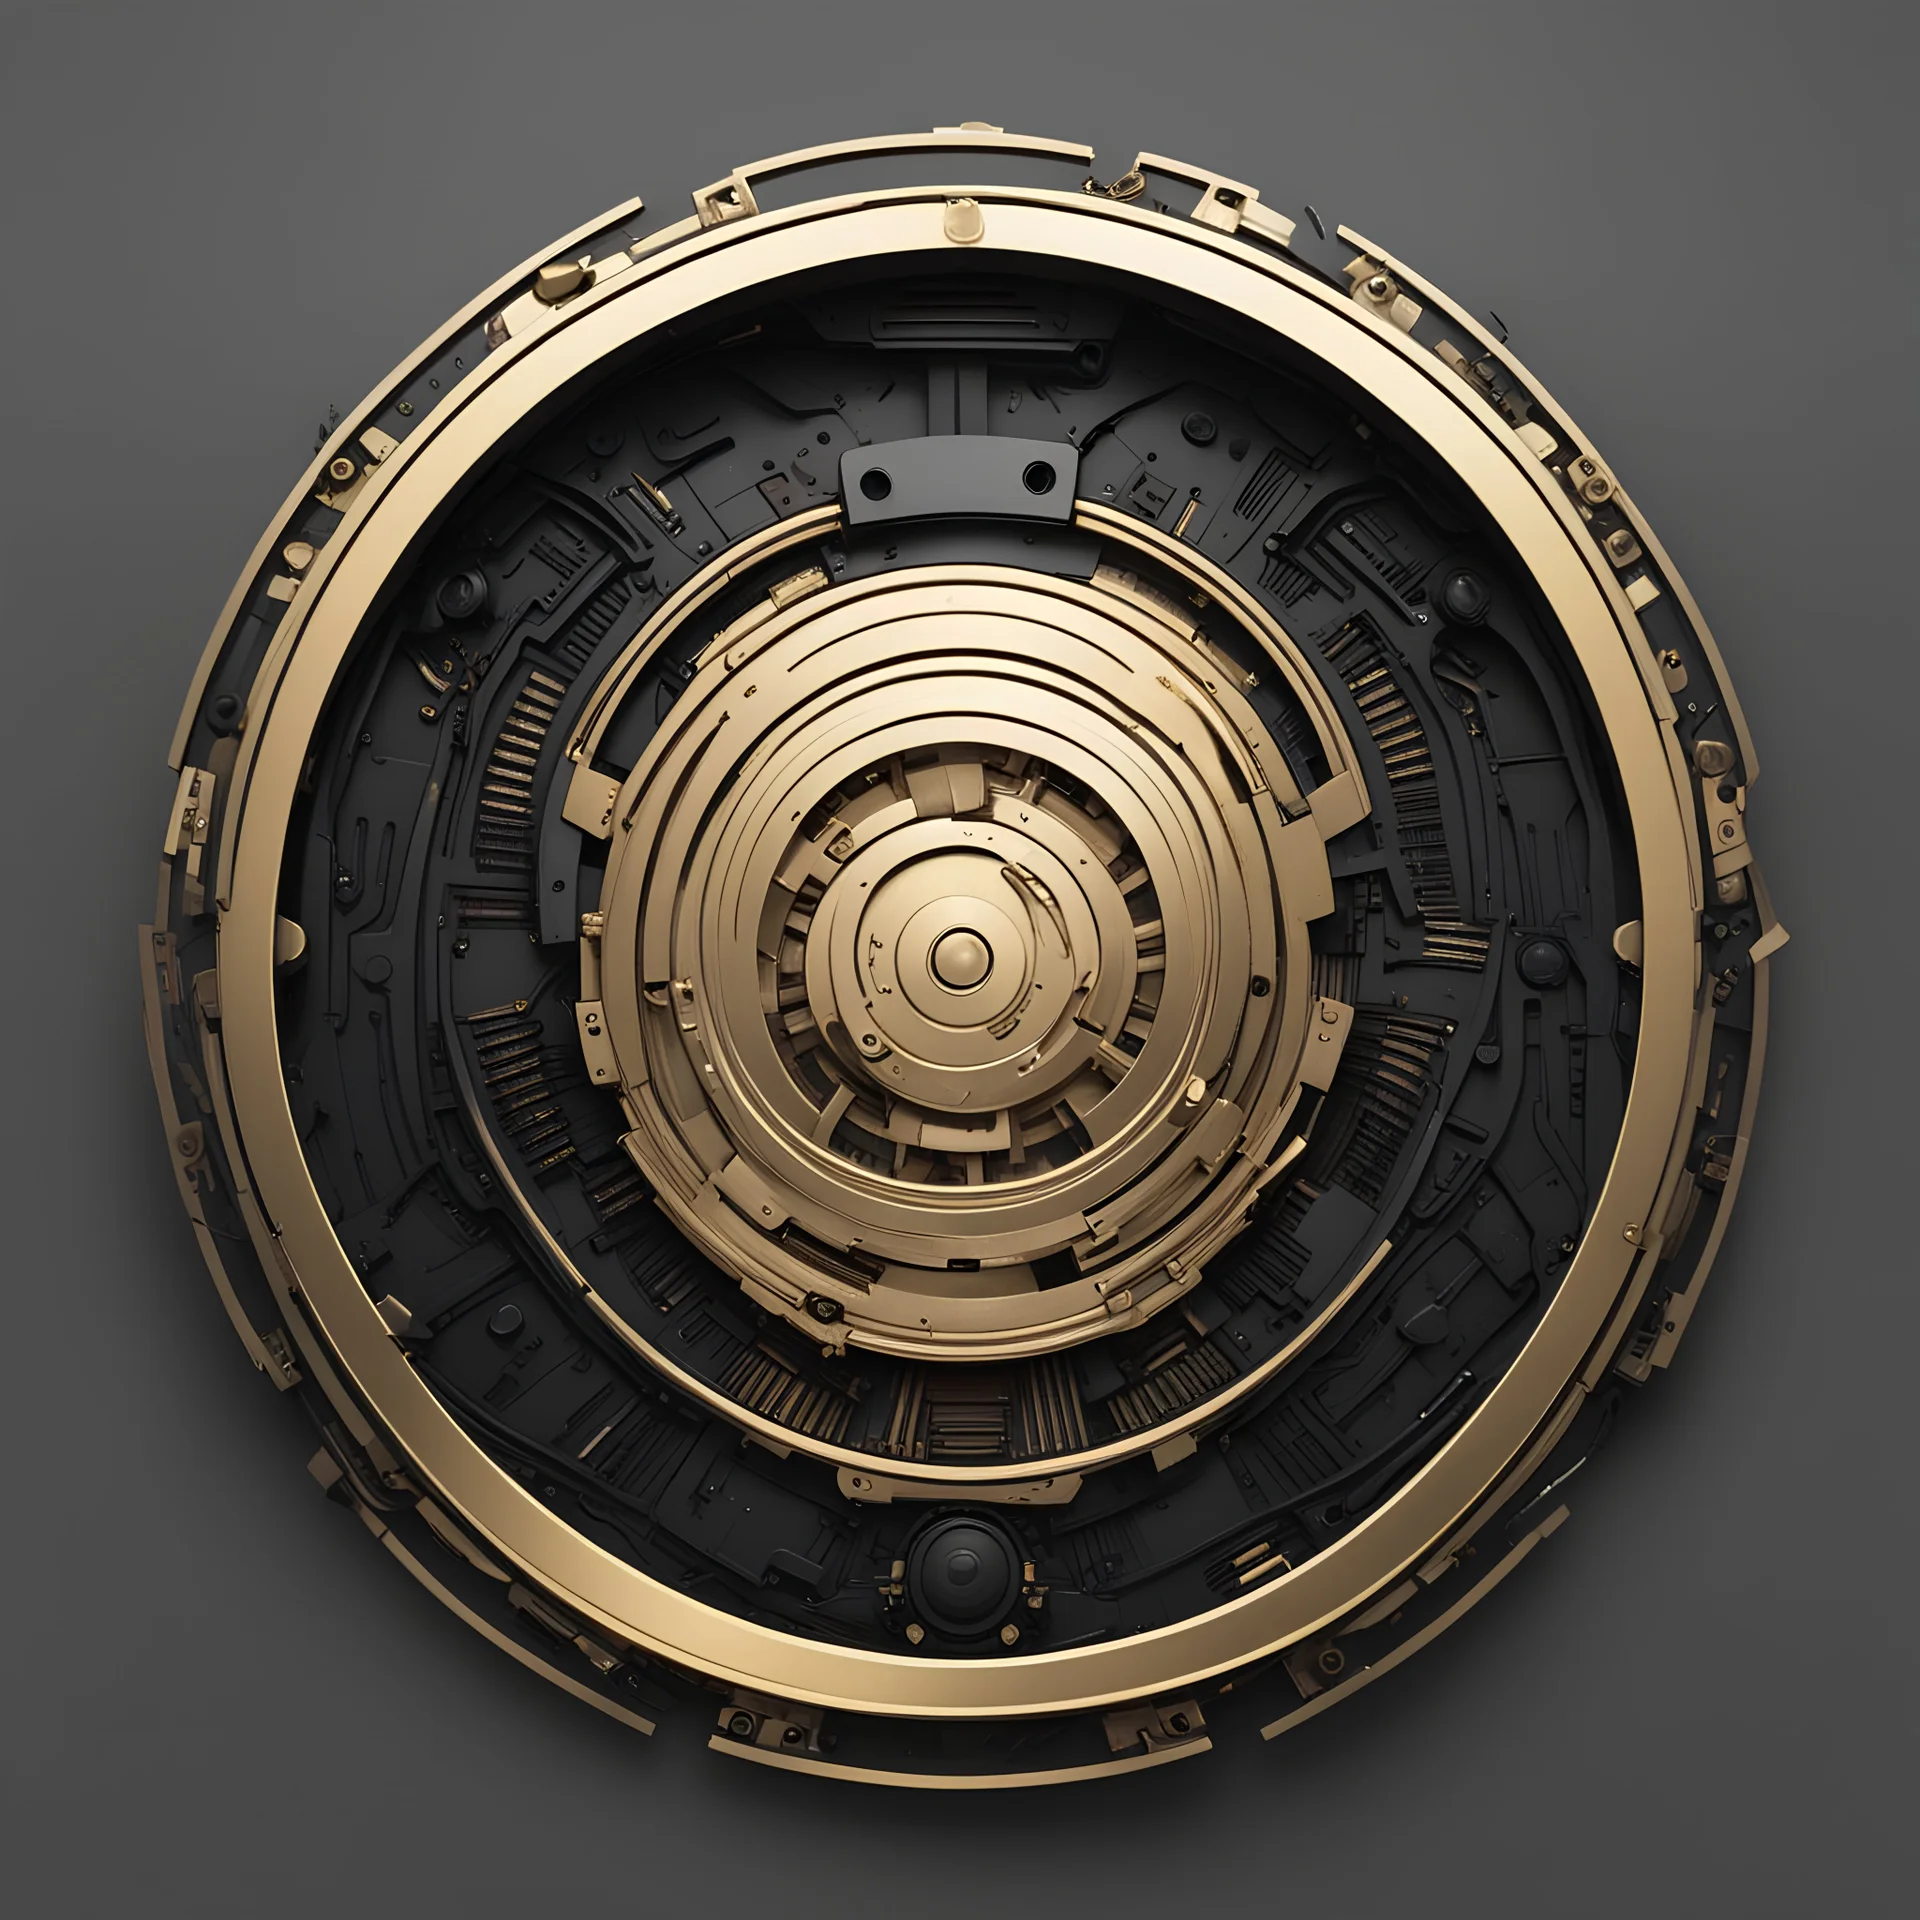 create me a thin round laurel golden rim. but mechanical cyberpunk laurels. background should be #000000 full black. no face should be visible. its just the rim. the middle should be empty.